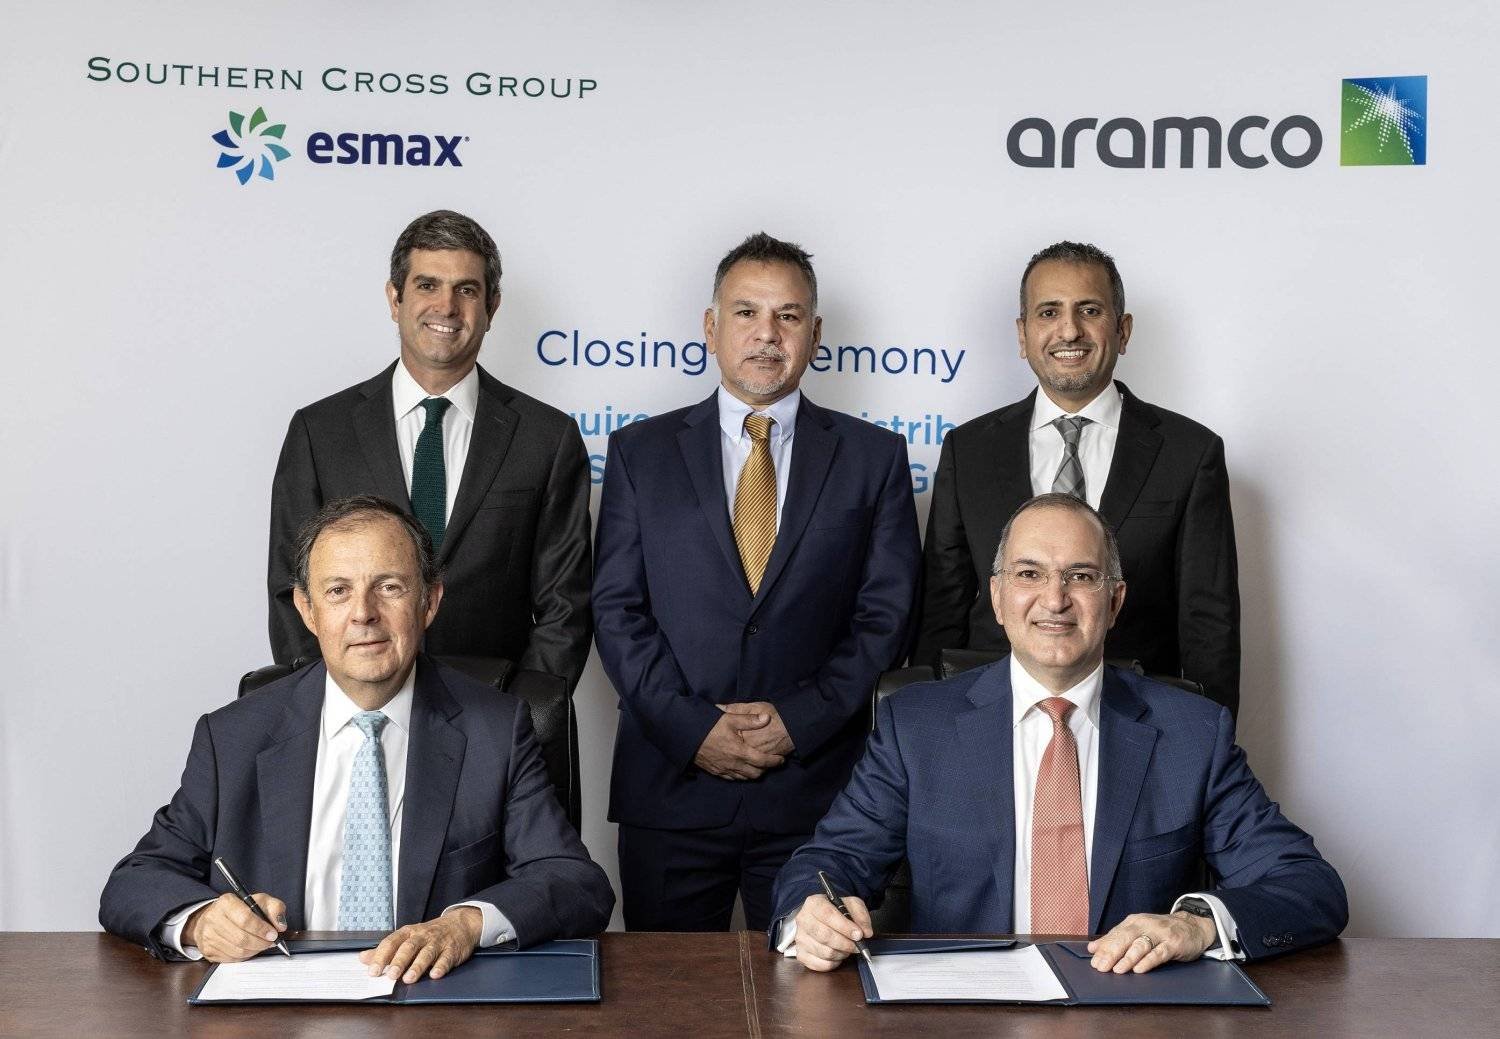 The transaction represents Aramco’s first downstream retail investment in South America. Photo: Aramco